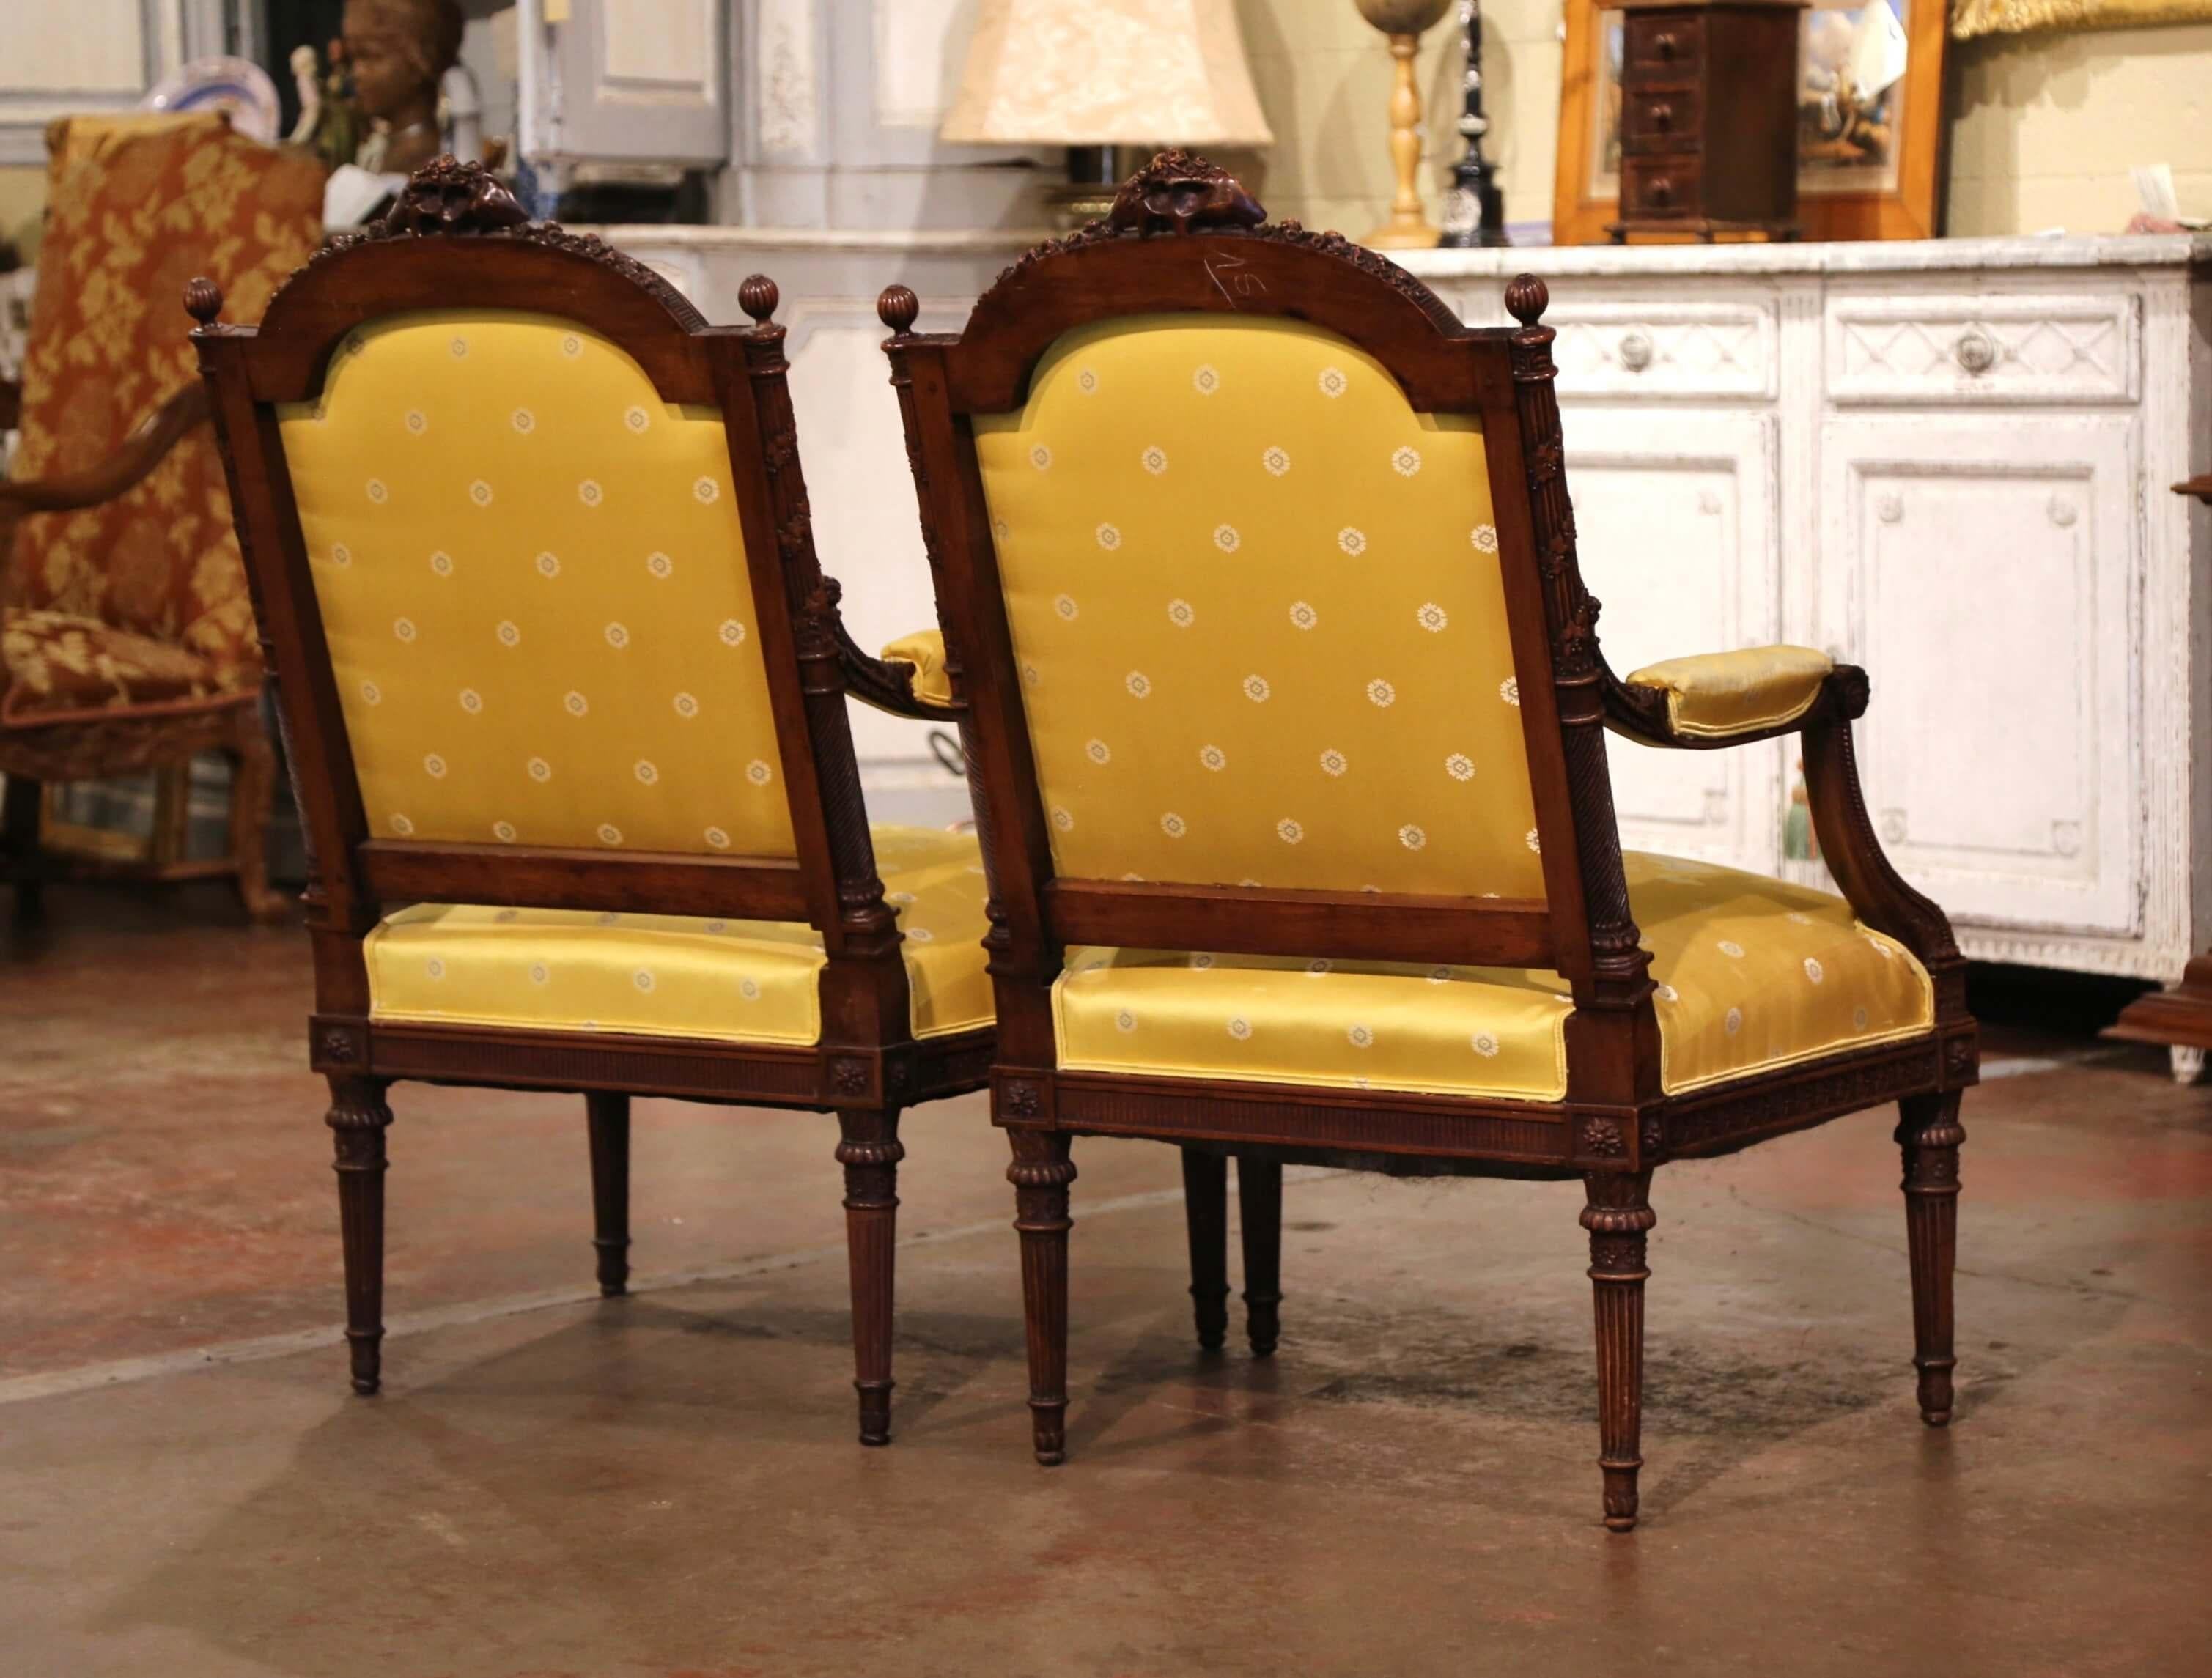 Pair of 19th Century French Louis XVI Carved Walnut Carved Fauteuils Armchairs For Sale 5